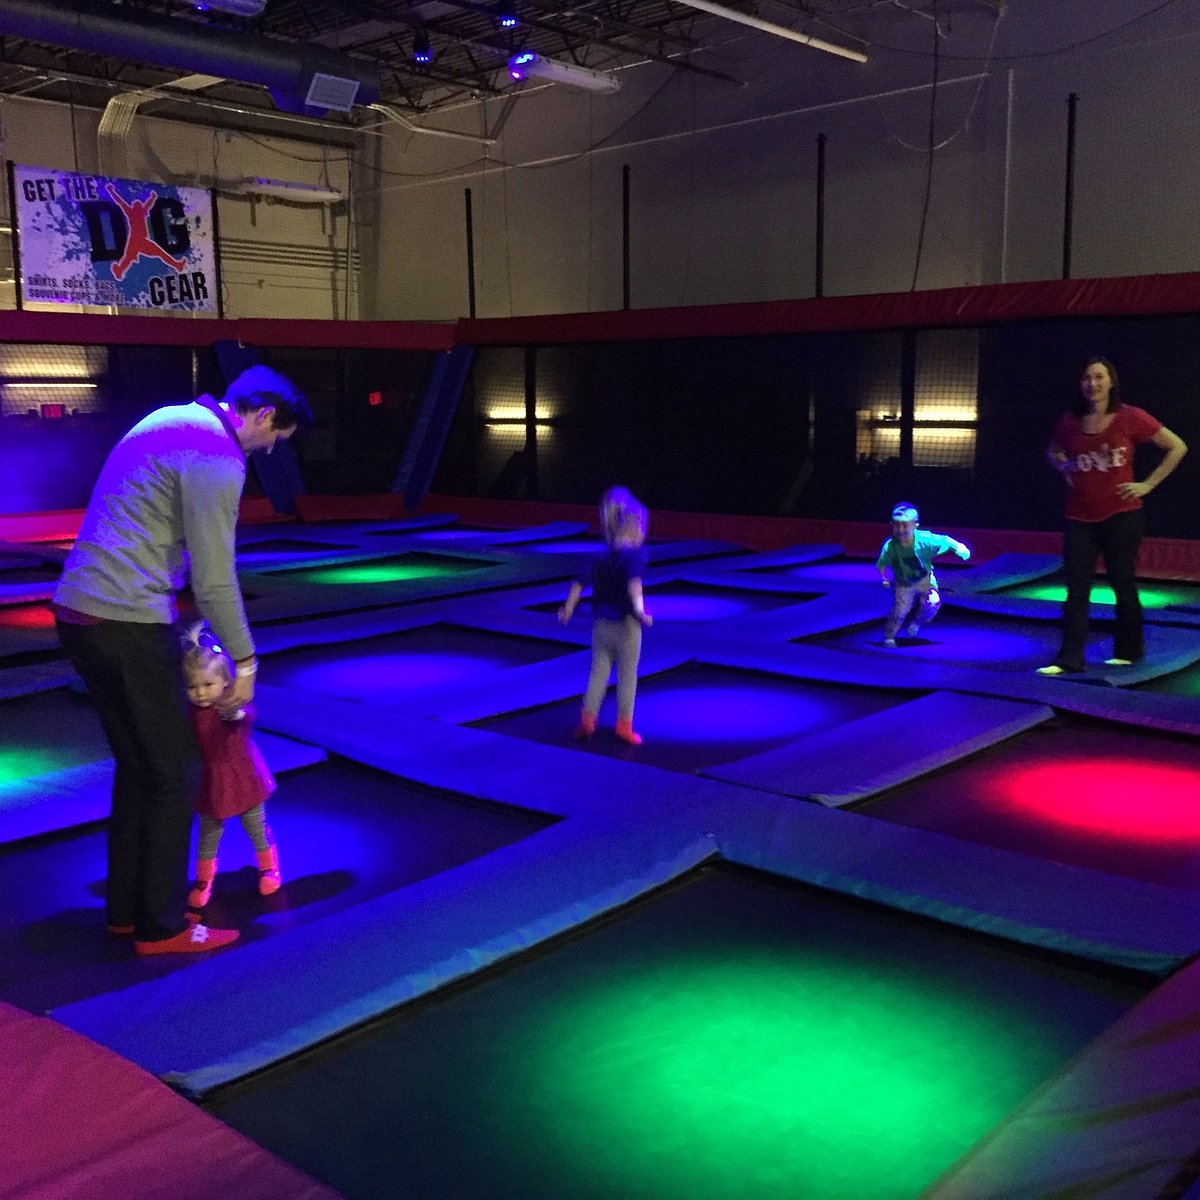 Defy Gravity Indoor Trampoline Park - All You Need to Know BEFORE